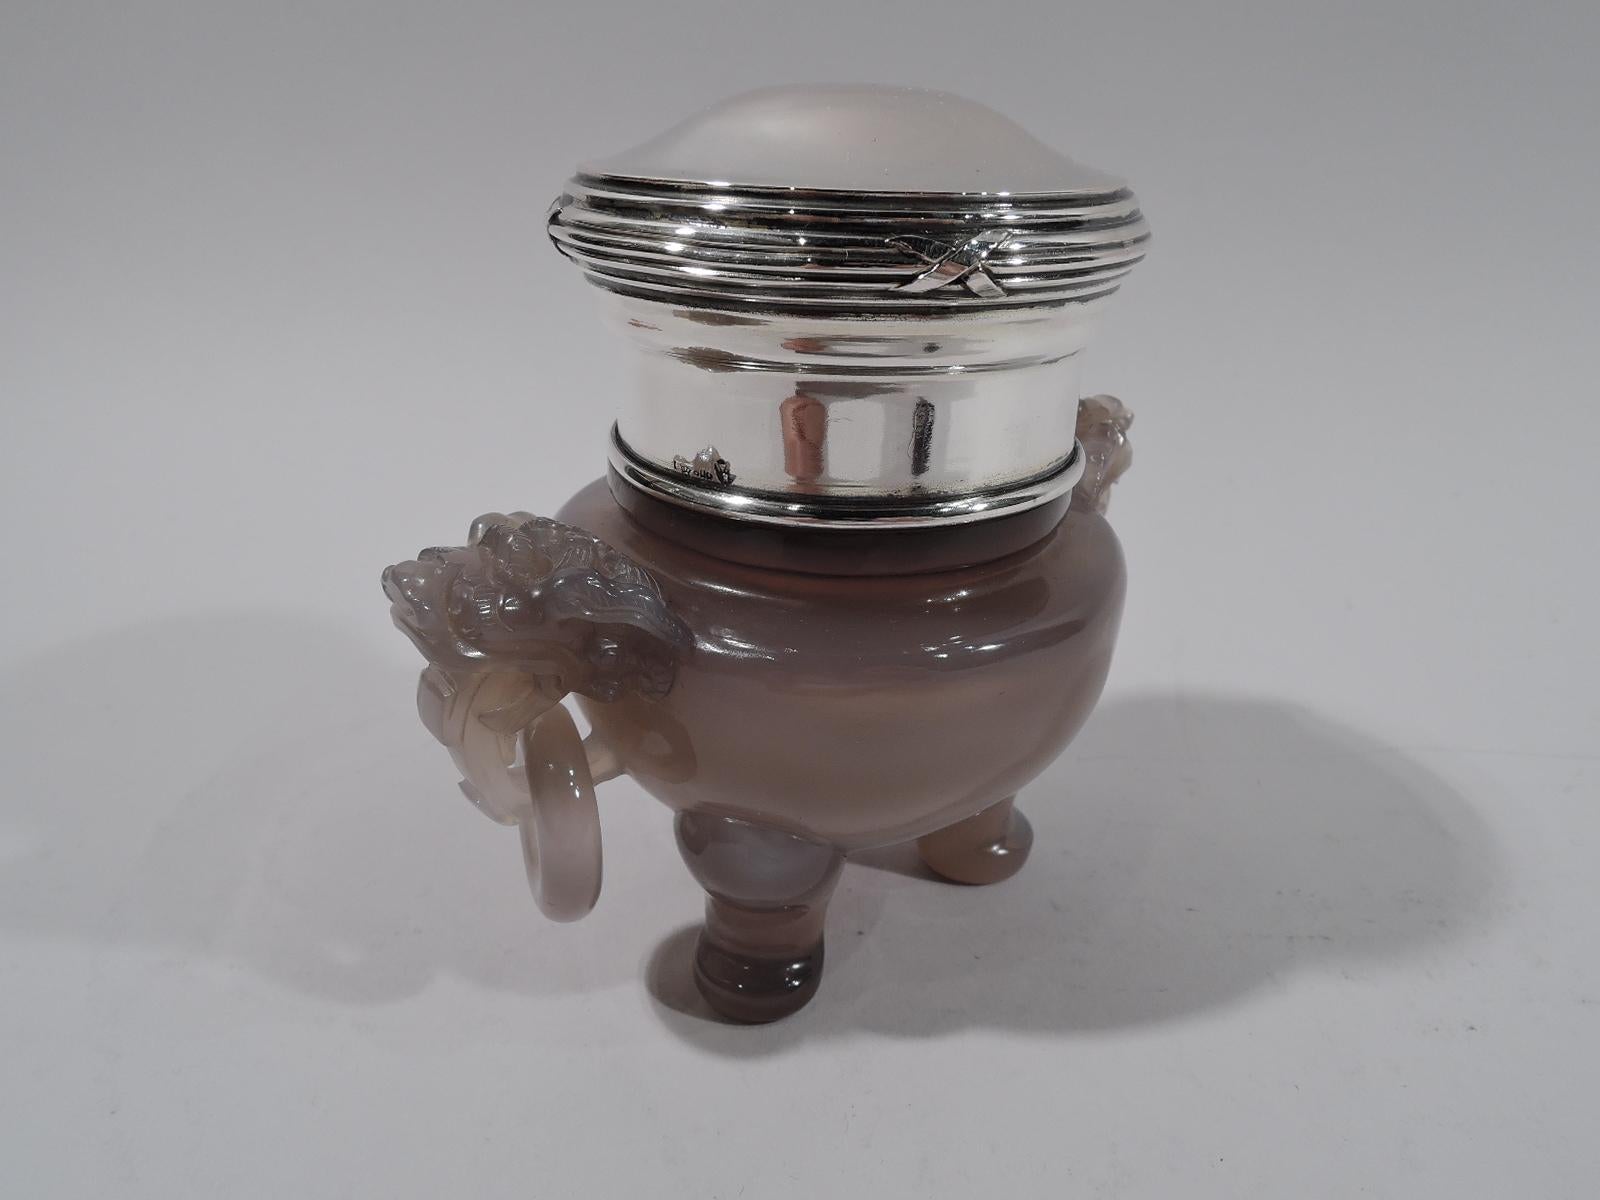 Turn of the century Chinese hard stone koro. Bellied bowl on sturdy leg-and-paw supports. Carved foo dog side mounts with loose-mounted rings. Short neck collar and raised and reeded cover are 800 silver. Cover has German marks.